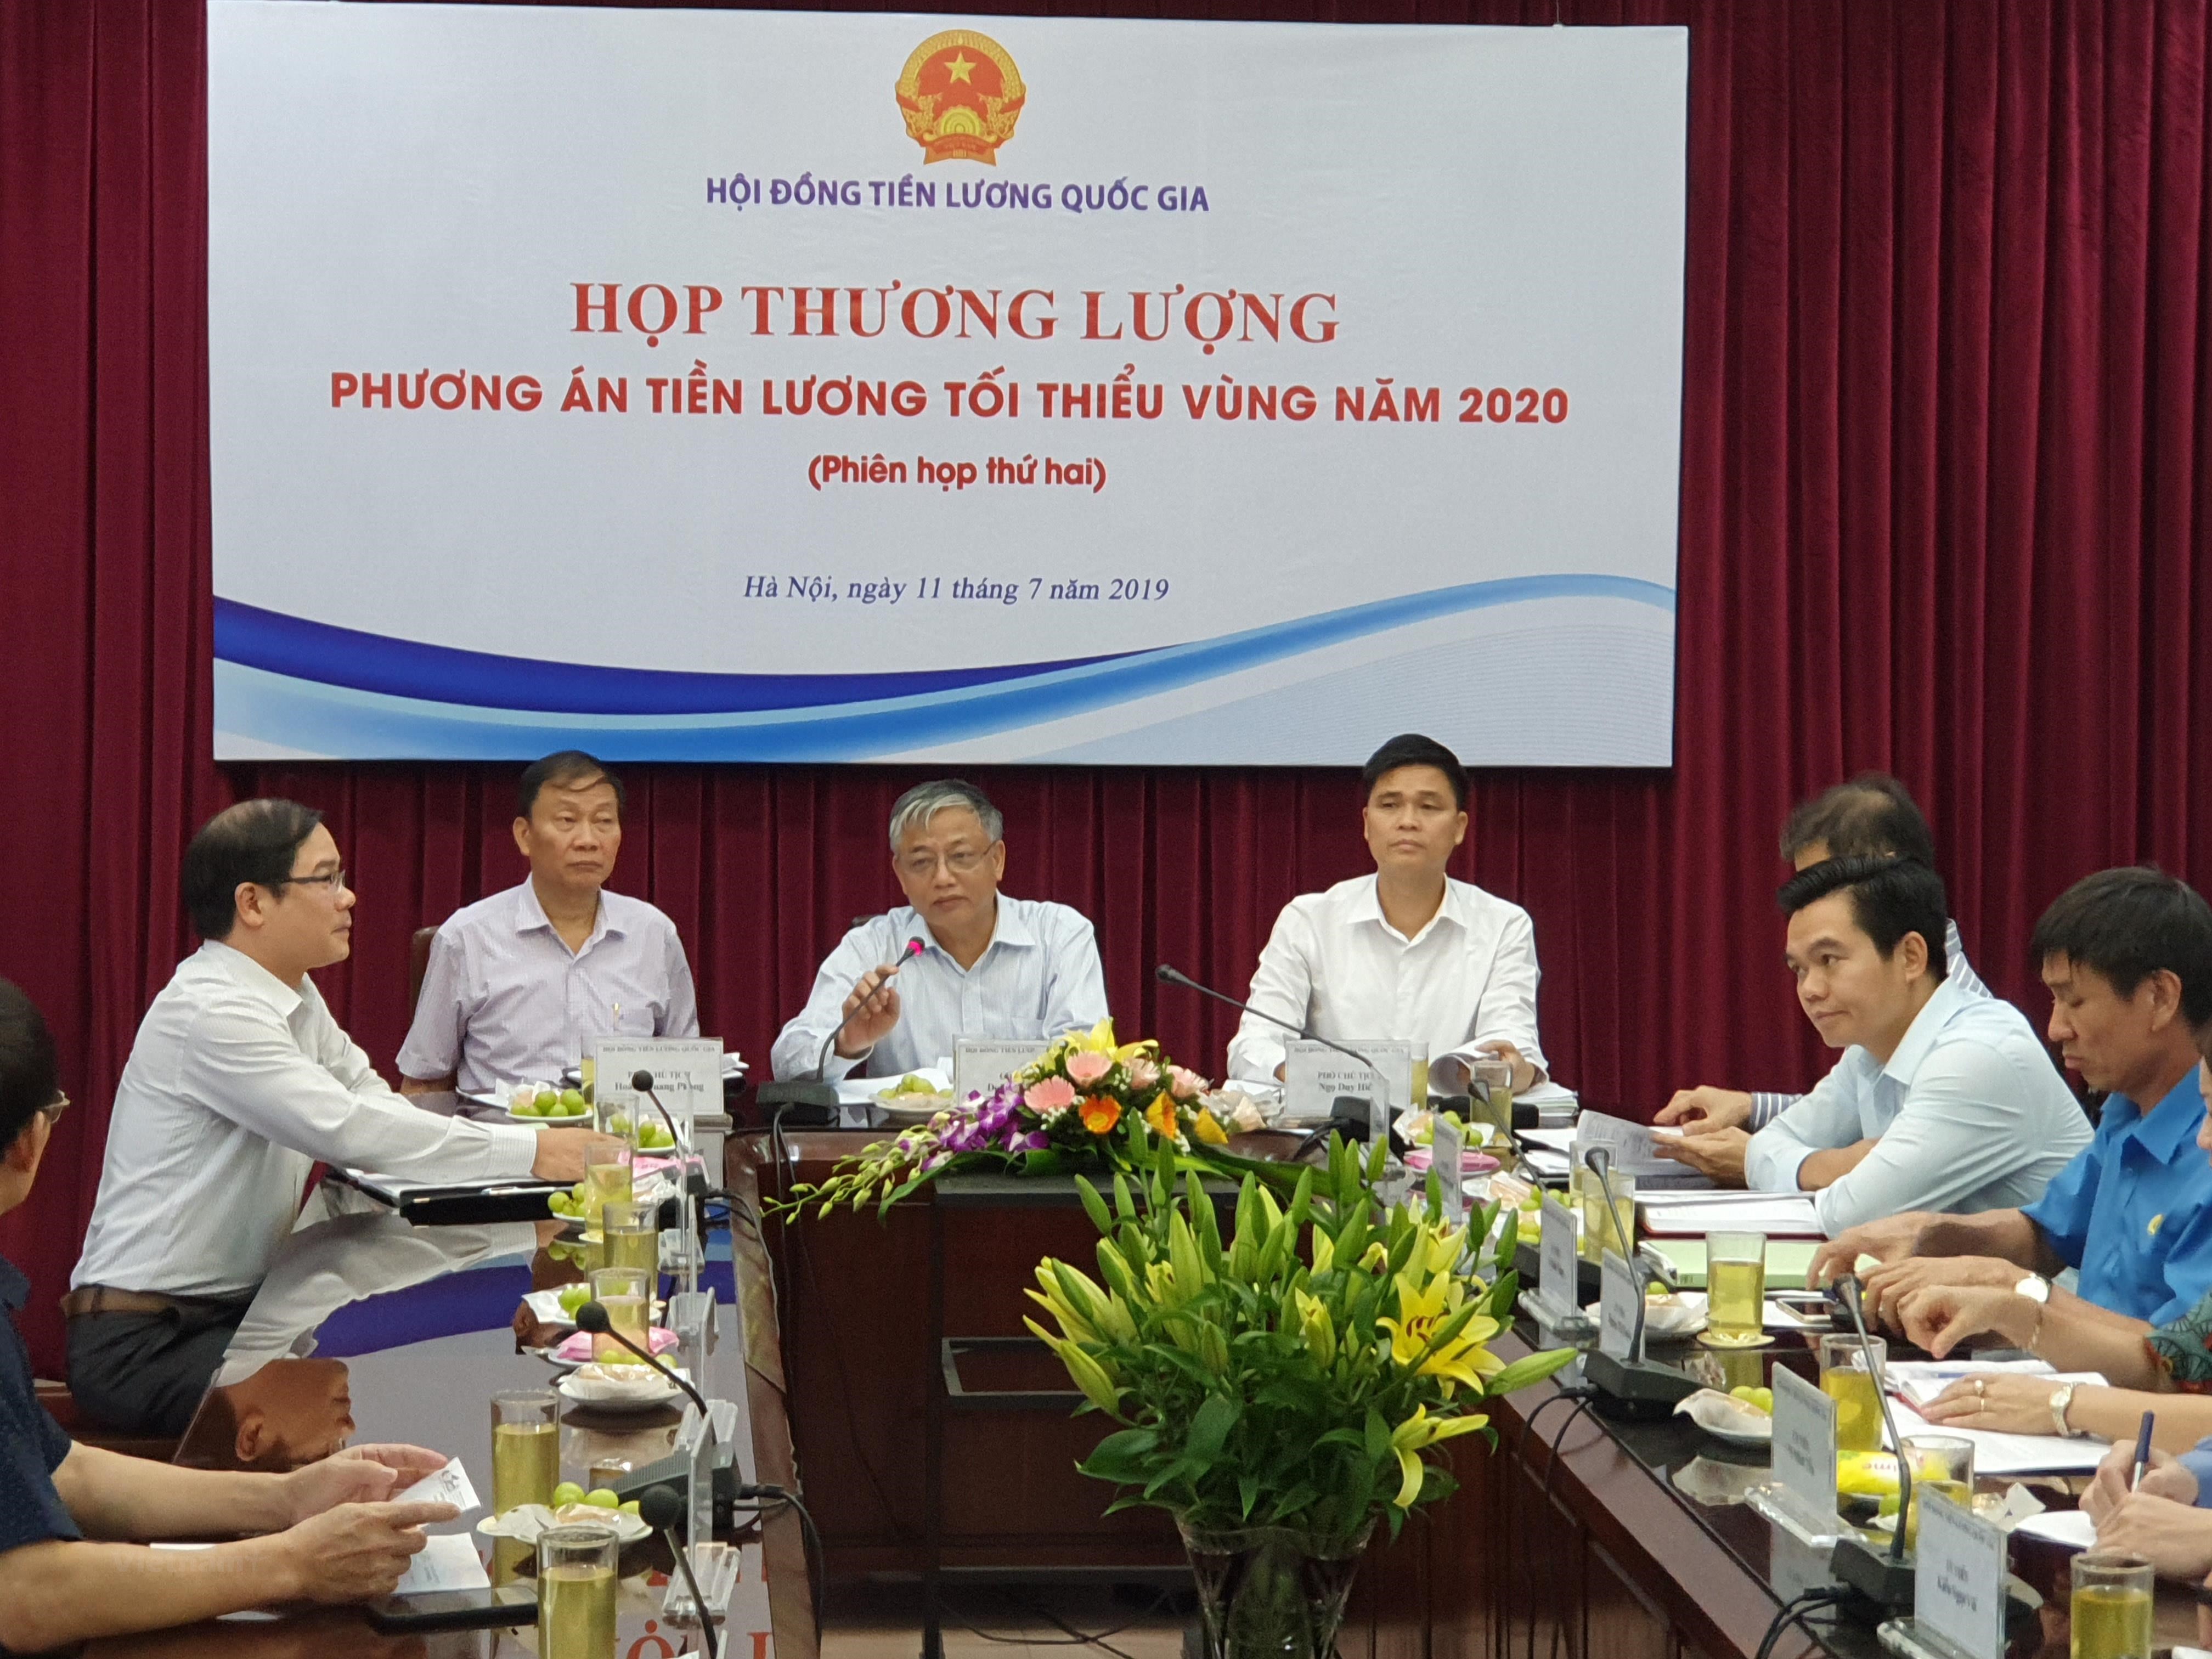 The organizational structure of Vietnam National Salary Council